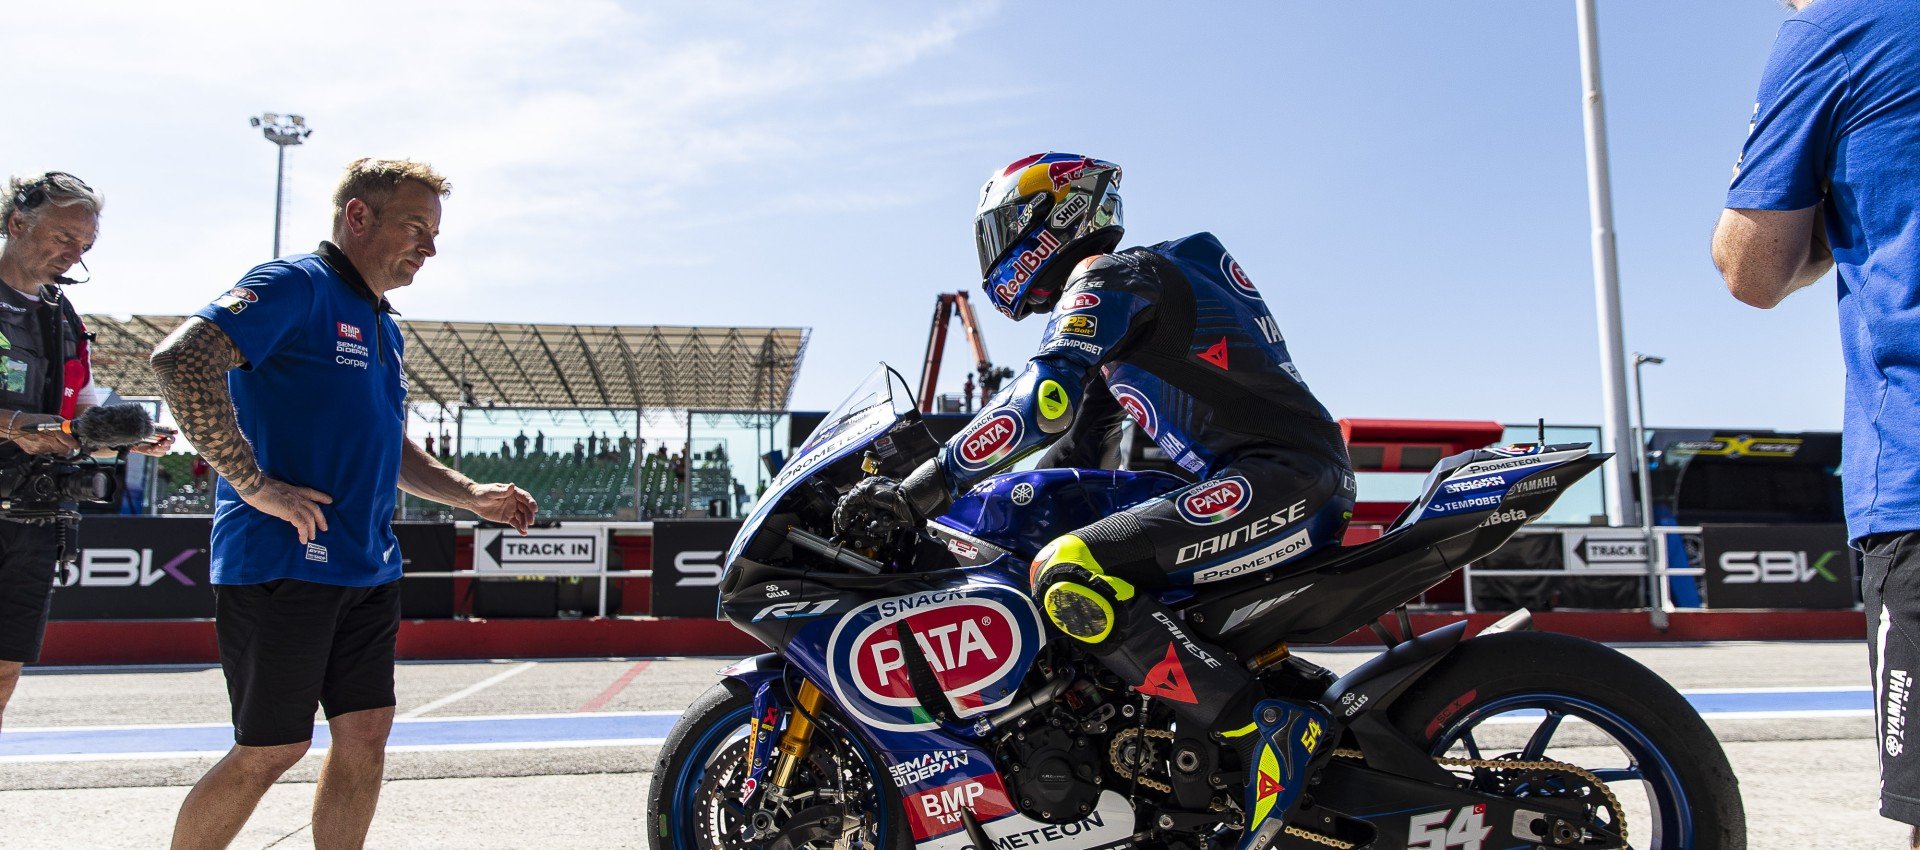 Pata Yamaha Prometeon takes a third and two second places at Misano